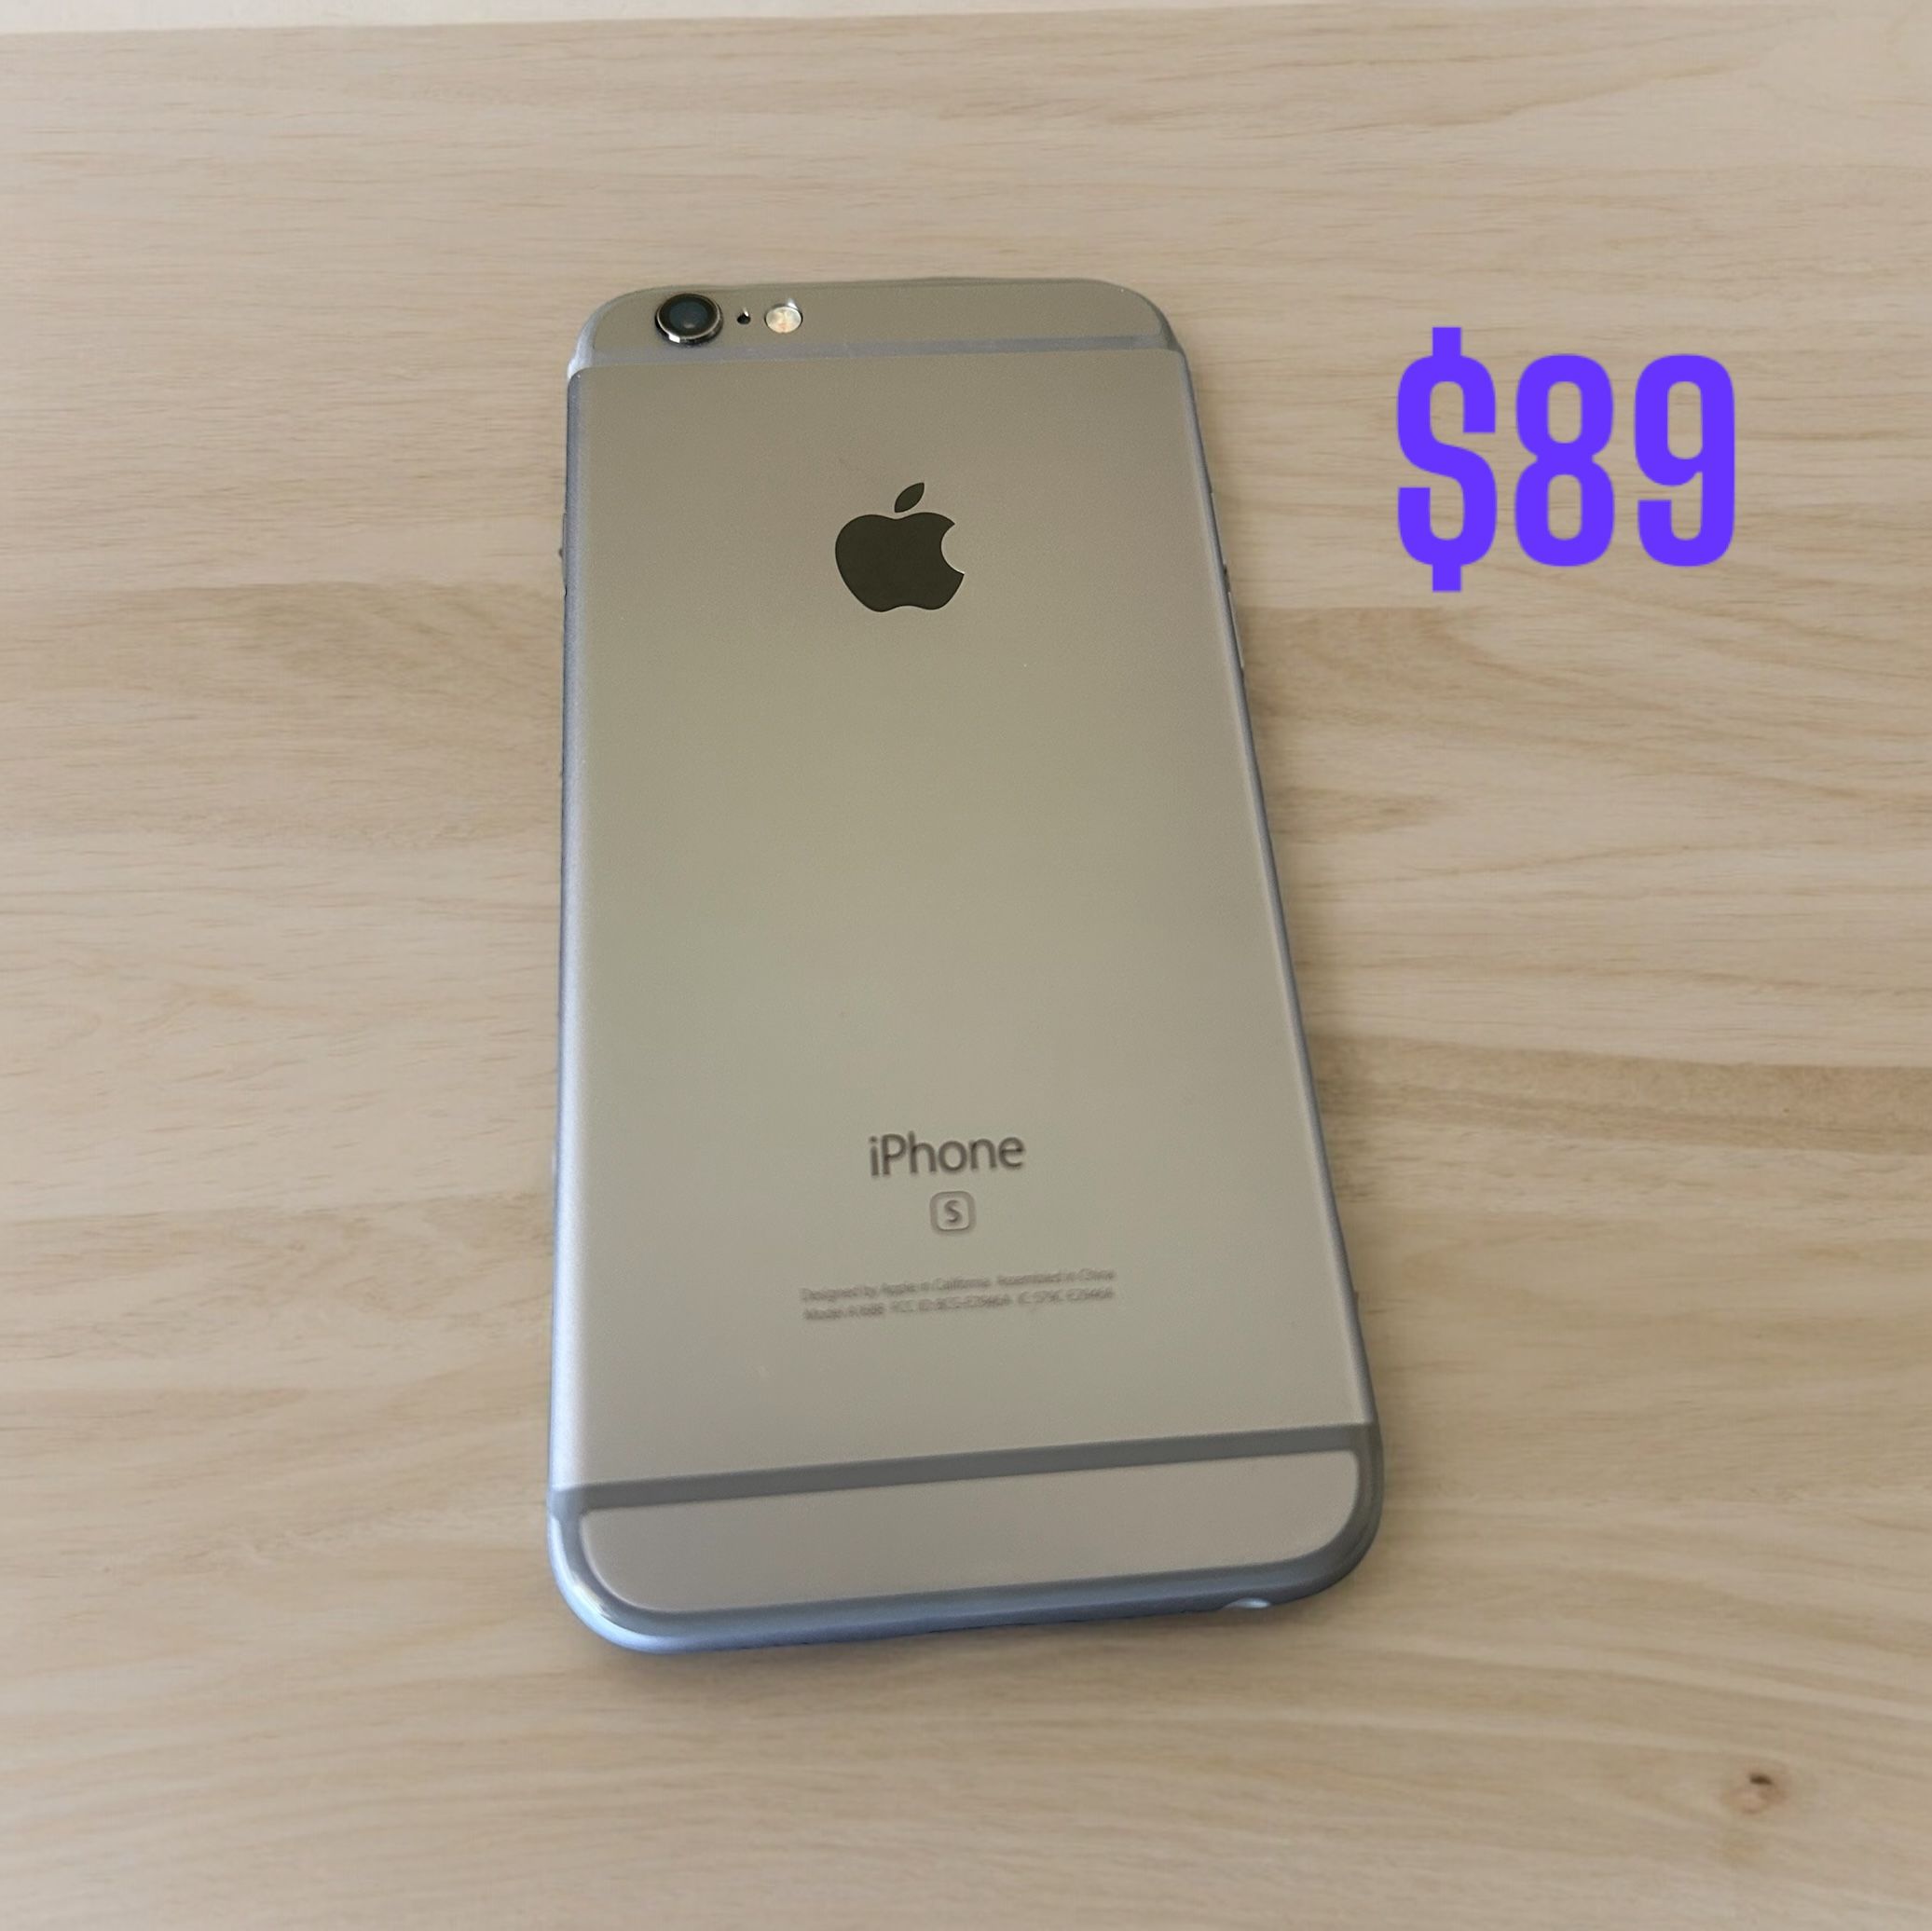   📲 iPhone 6s (128GB )  UNLOCKED 🌎 DESBLOQUEADO For All Carriers 